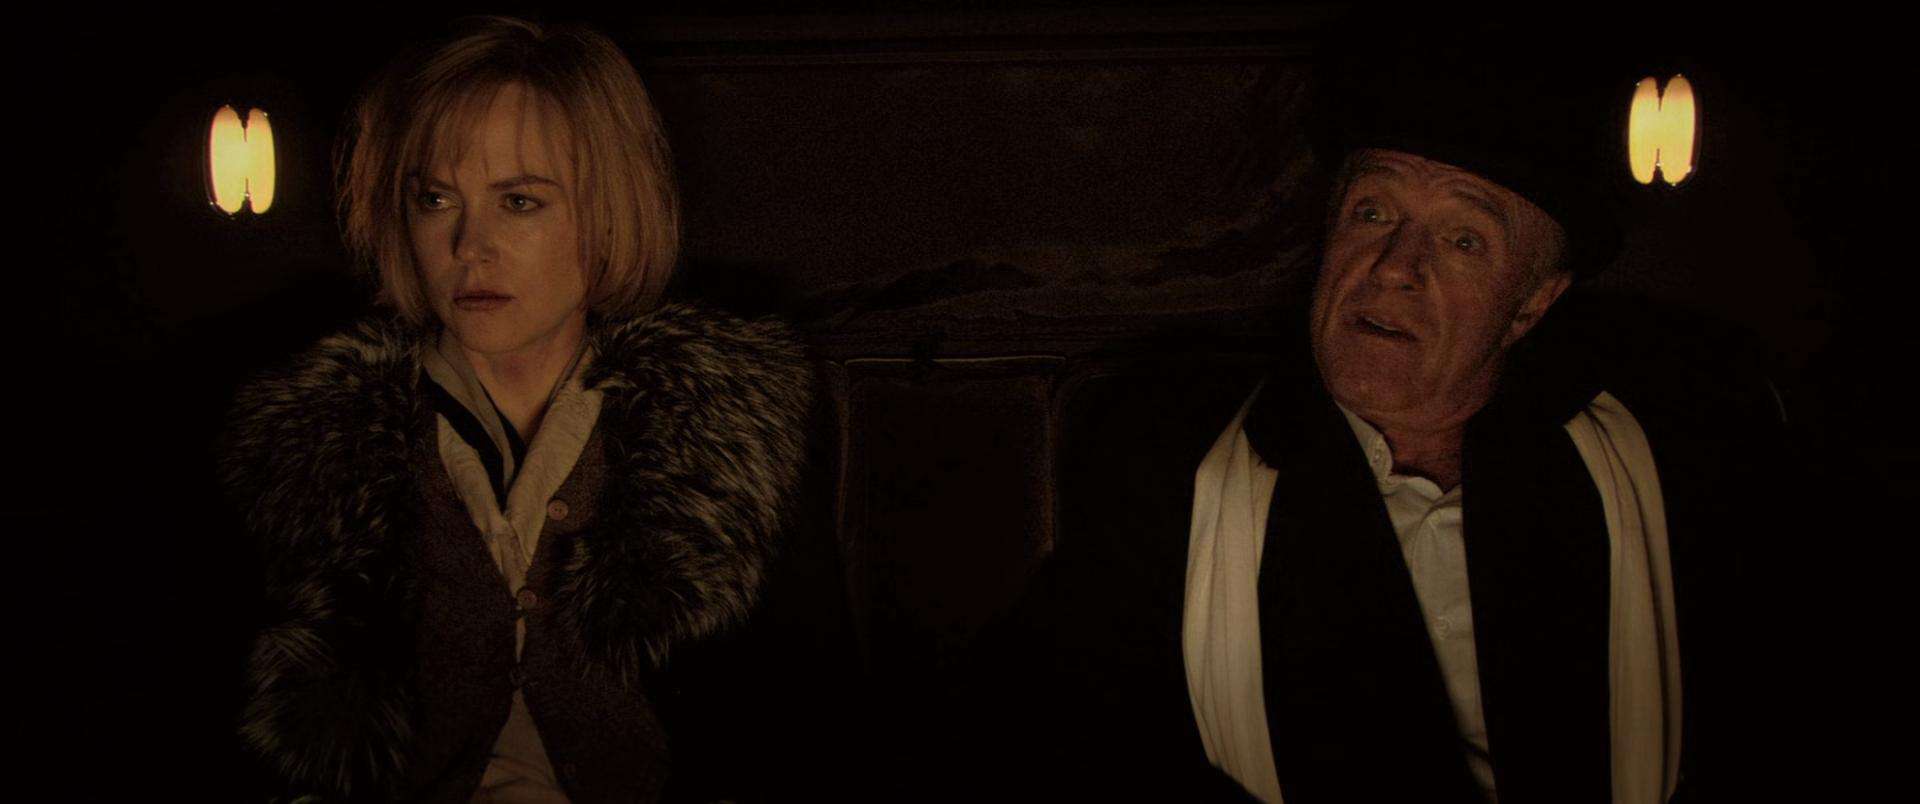 Nicole Kidman and James Caan in Dogville (2003)